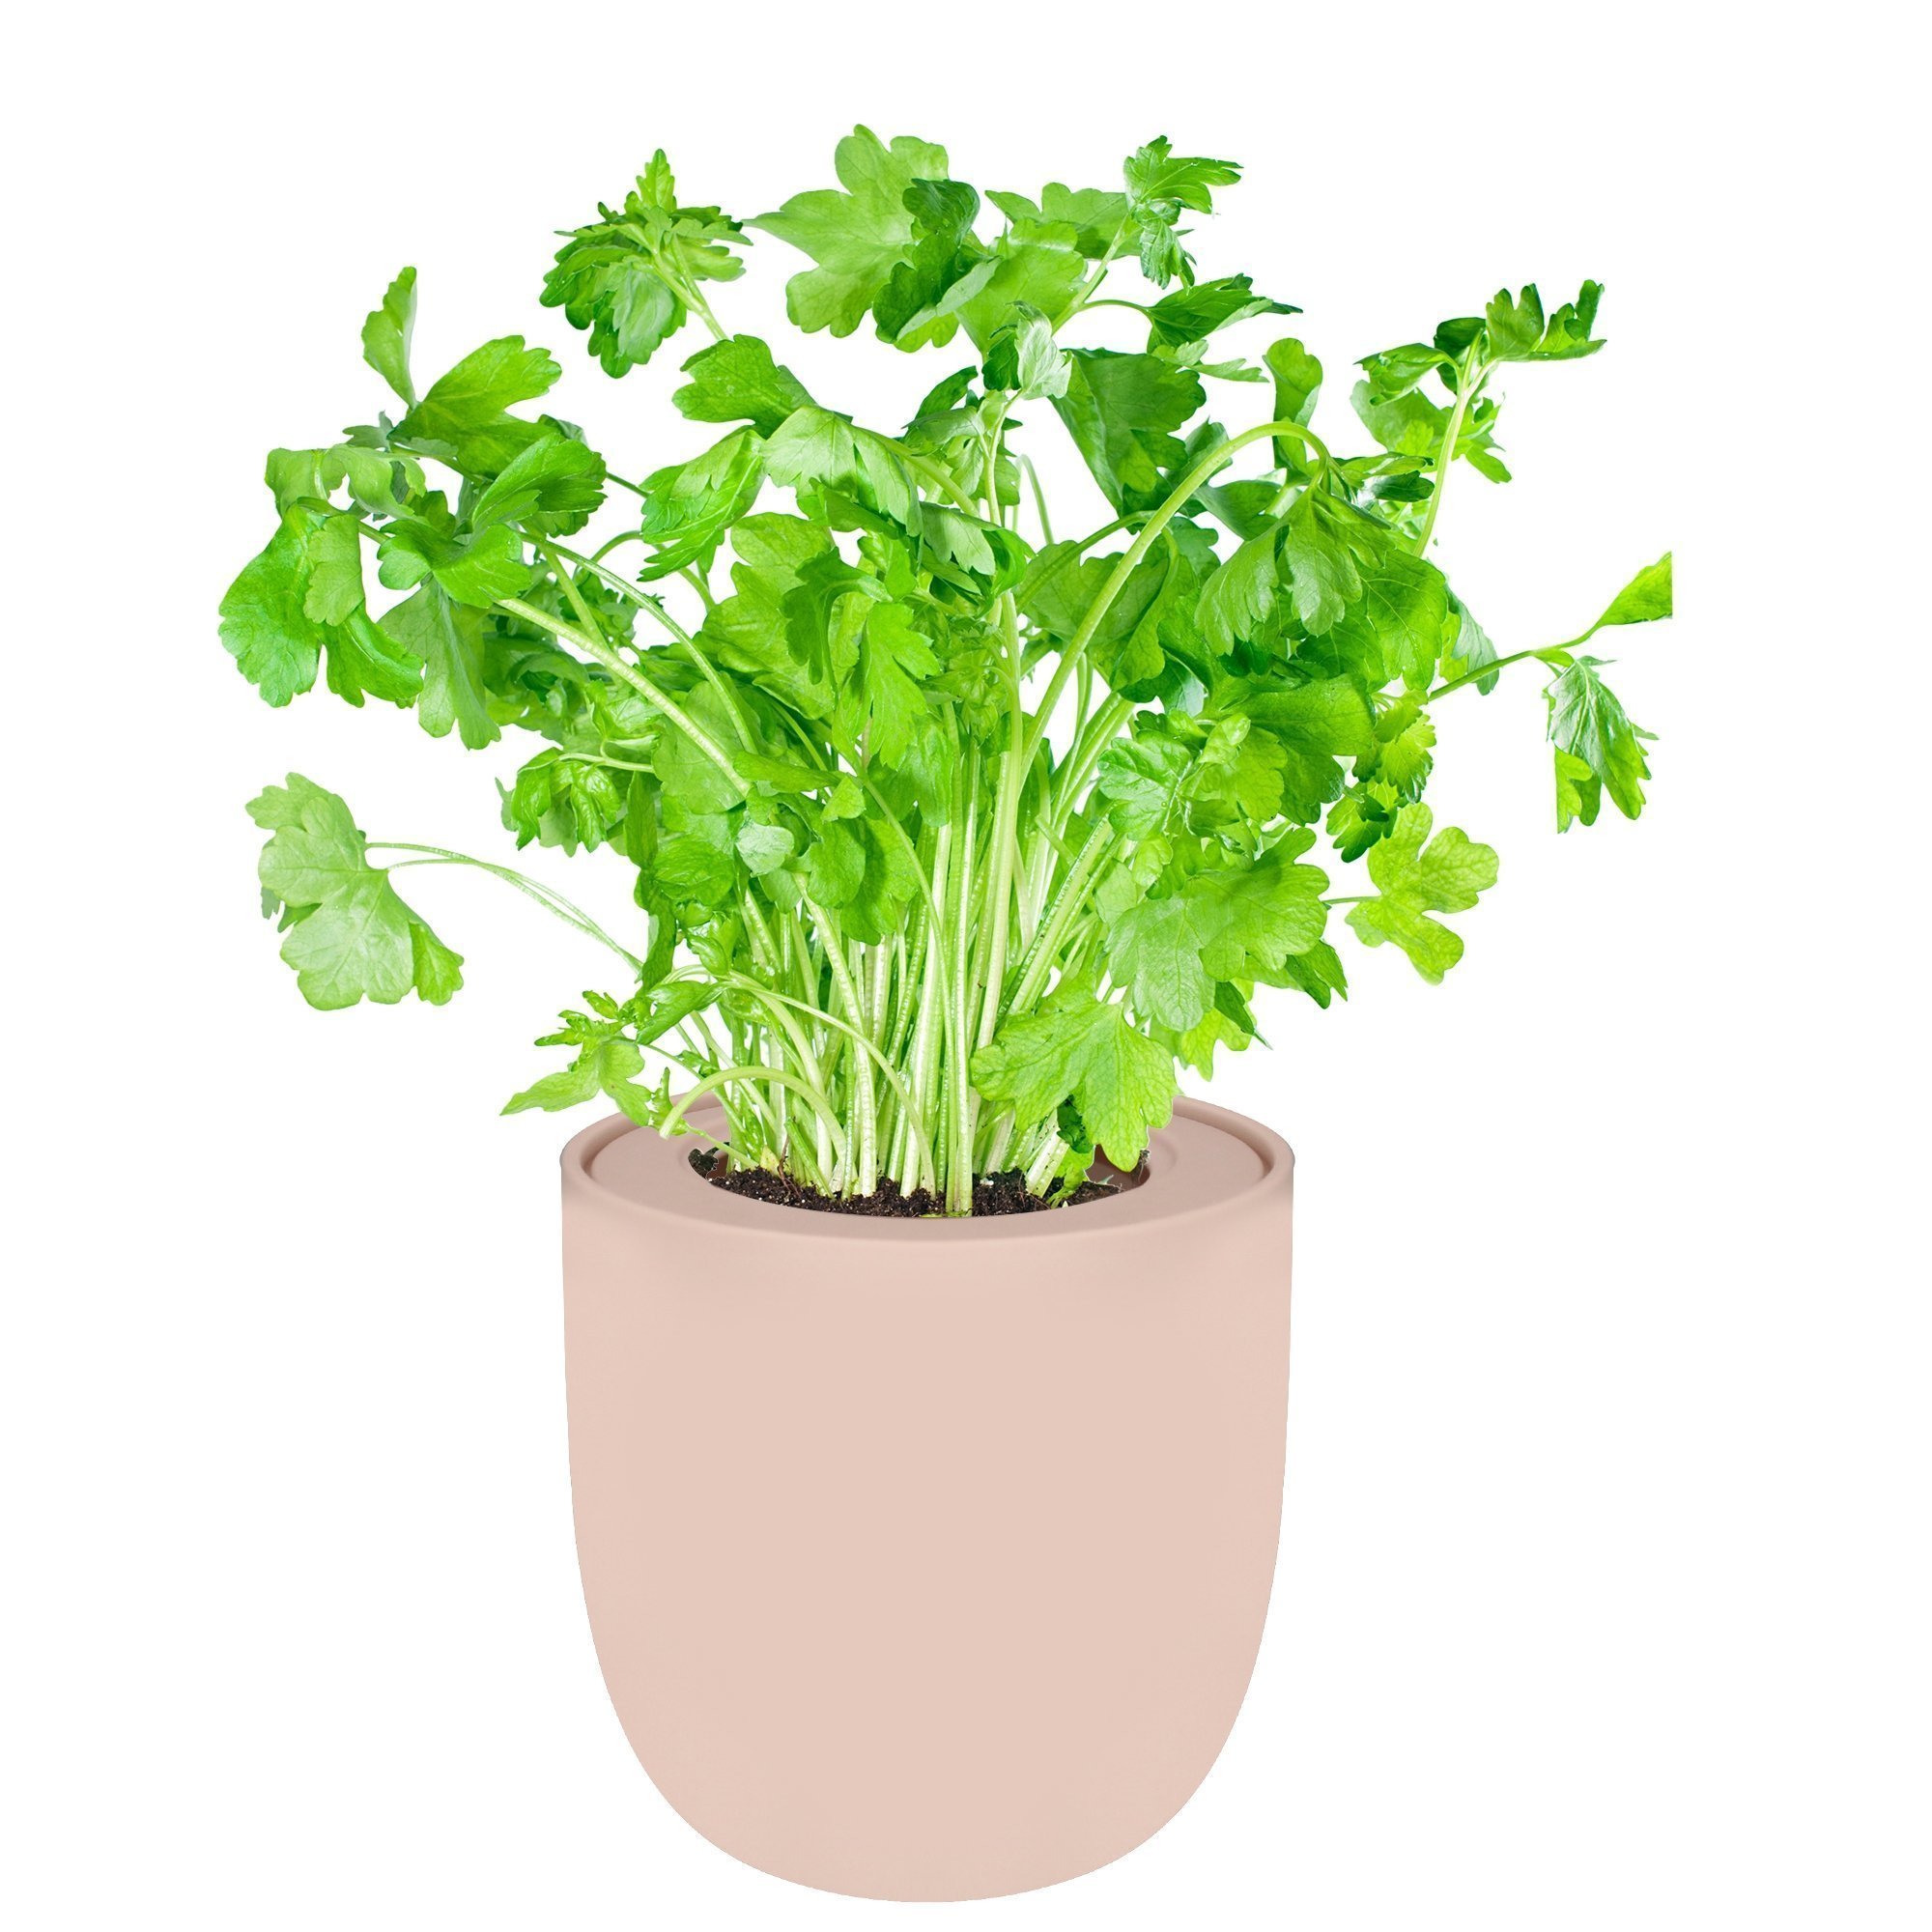 Hydroponic Herb Growing Kit With Pink Ceramic Pot and Organic Seeds (Parsley)